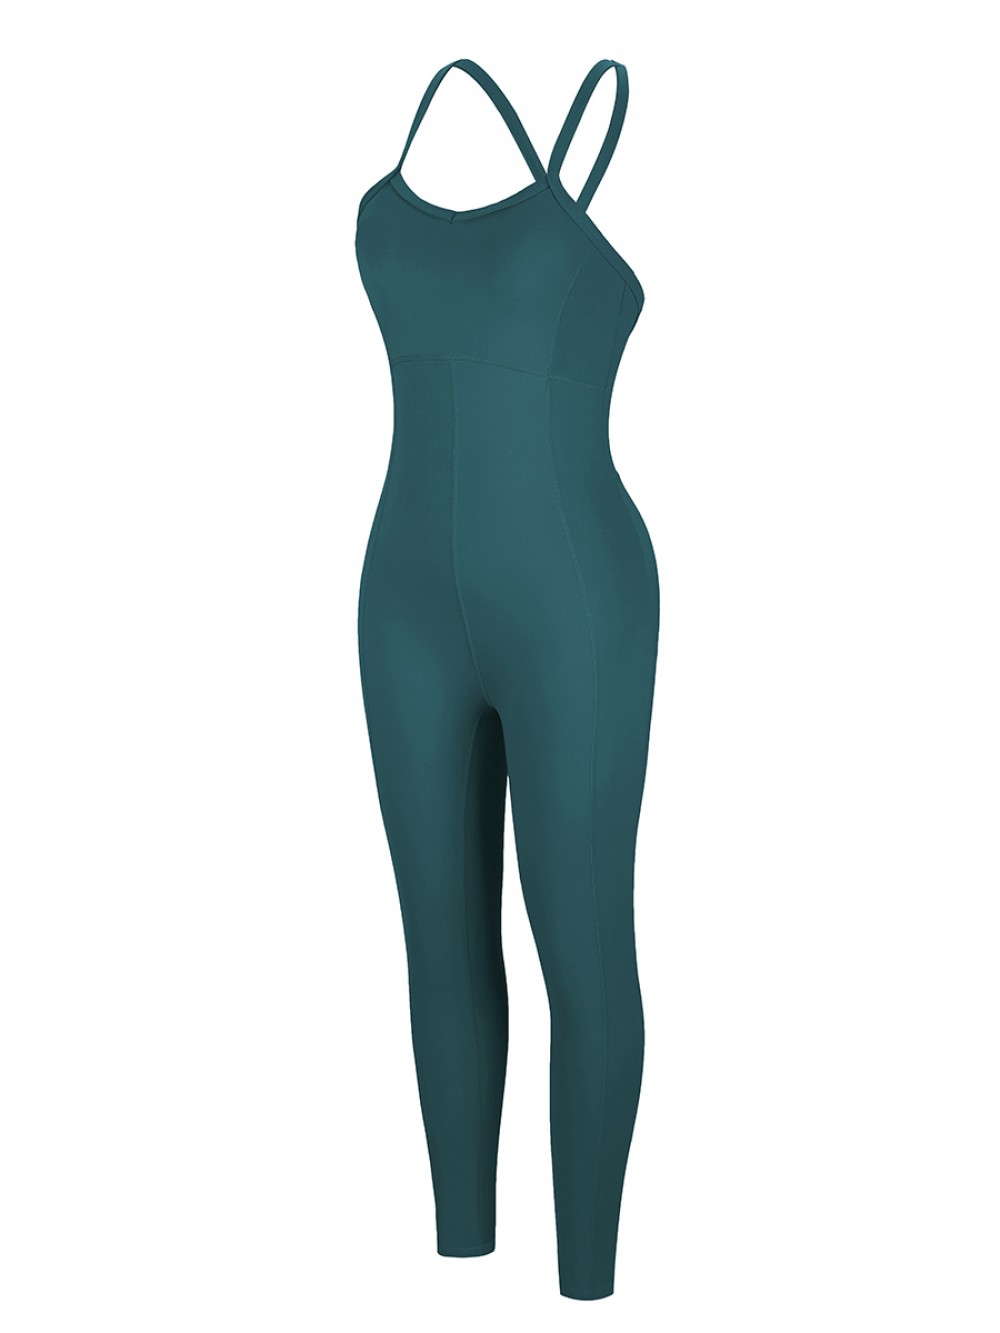 Blue Cross Back Pleated Sling Athletic Jumpsuit Best Materials